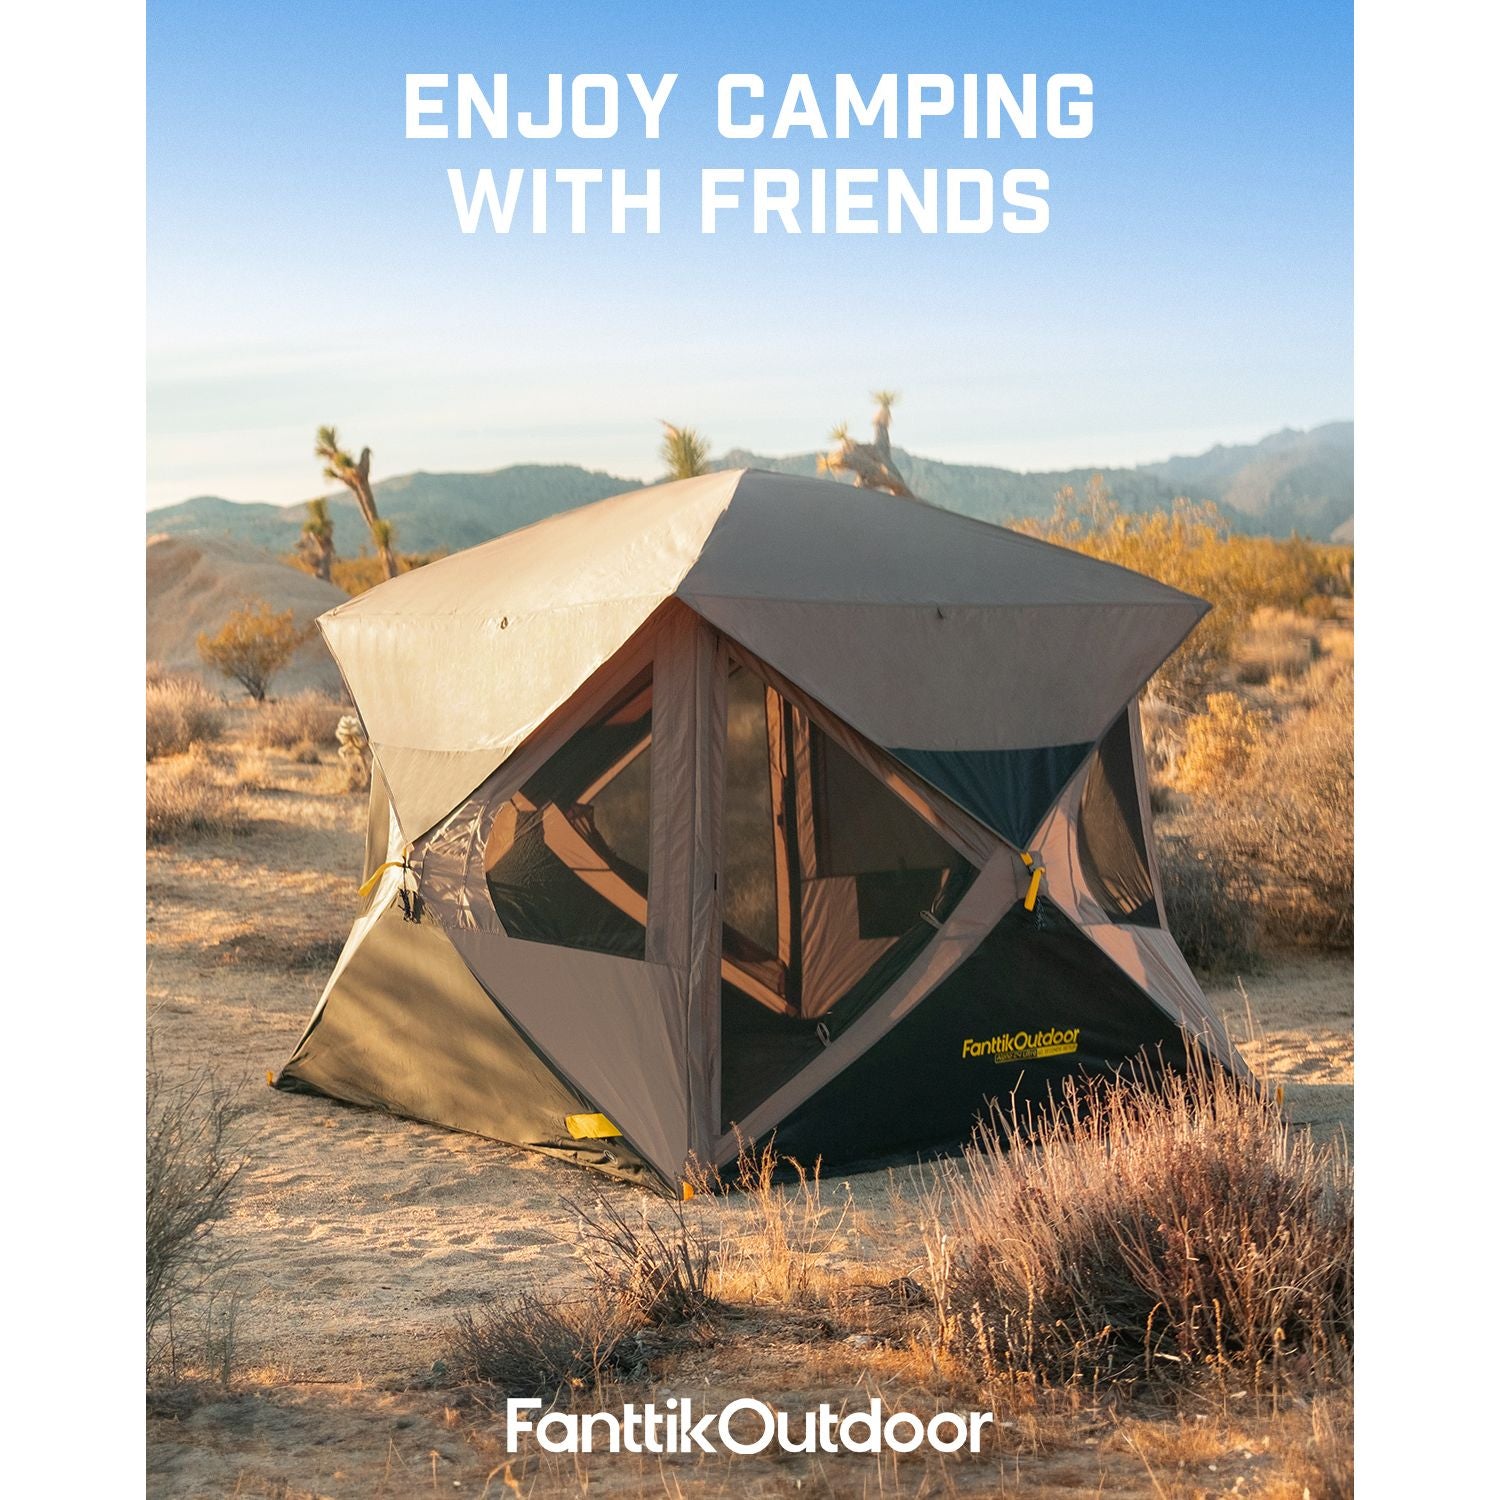 FanttikOutdoor Alpha C4 Ultra Instant Cabin Tent set up in a desert landscape with text 'Enjoy Camping with Friends.'